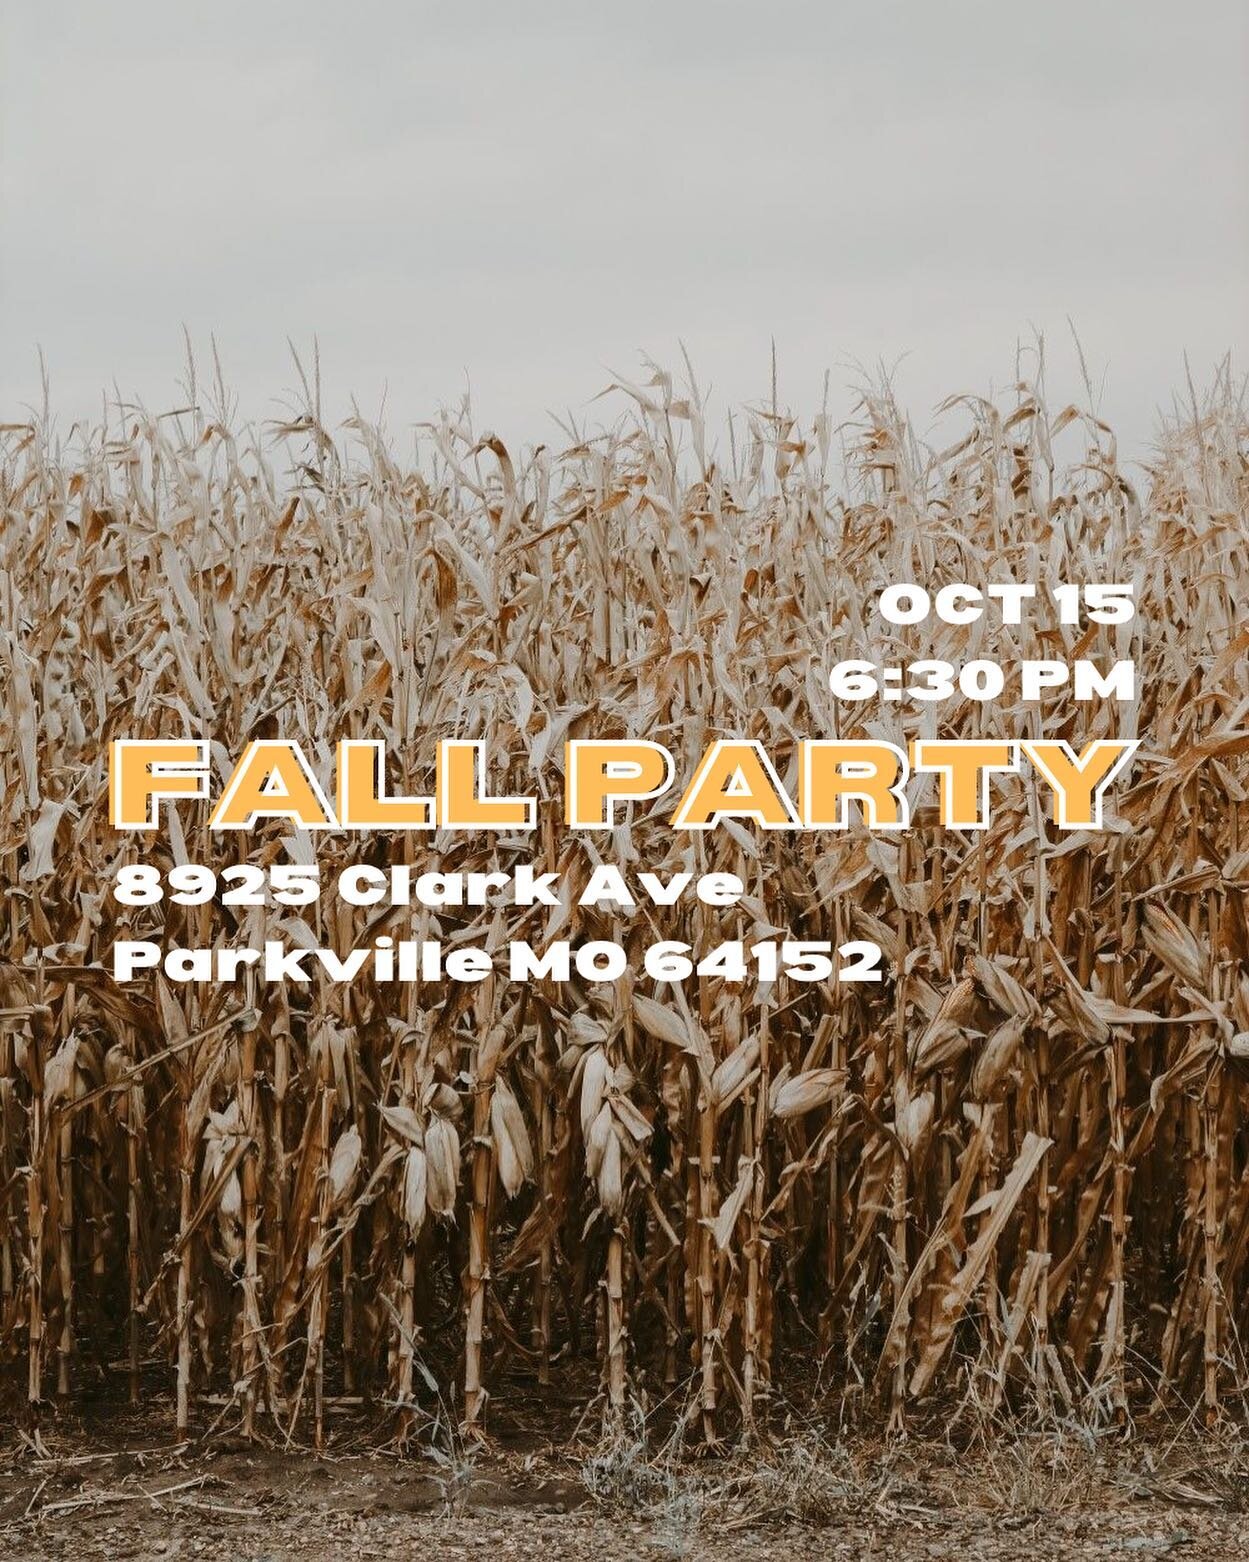 FALL PARTY 🏈🎃🍂

- All Youth !!!
- Potato Gun &amp; Pumpkin Launcher
- Chili, Chili, &amp; Chili
- Sweaters, S&rsquo;mores, Cider
- ANYTHING FALL THEMED

When? October 15th
Where? 8925 Clark Ave Parkville MO 64152

Bring a friend and enter to win a